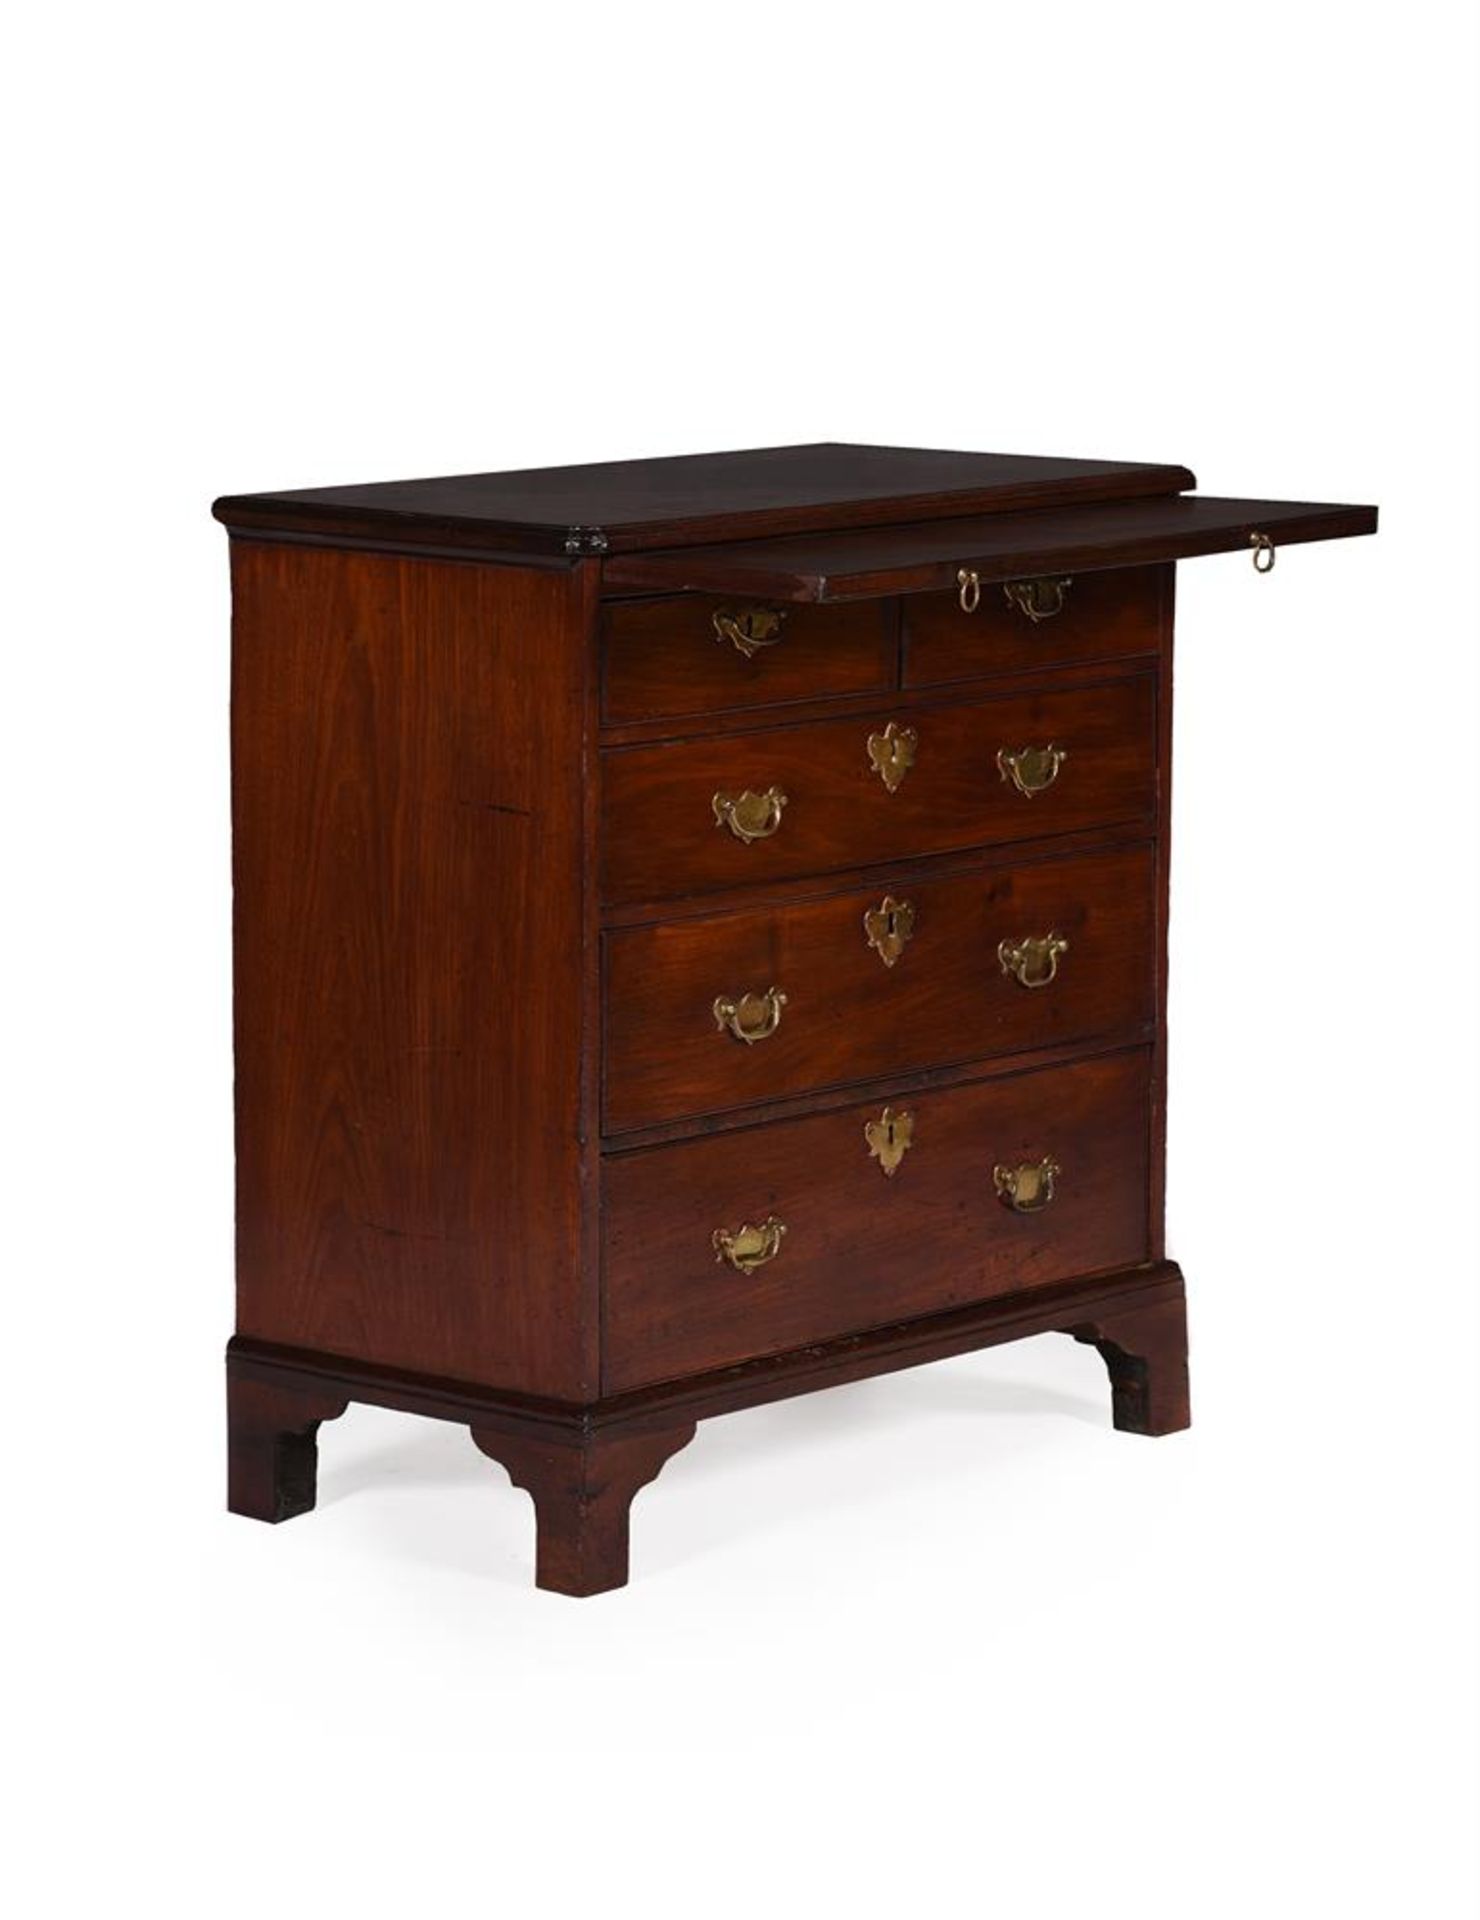 A GEORGE III MAHOGANY CHEST OF DRAWERS - Image 3 of 7